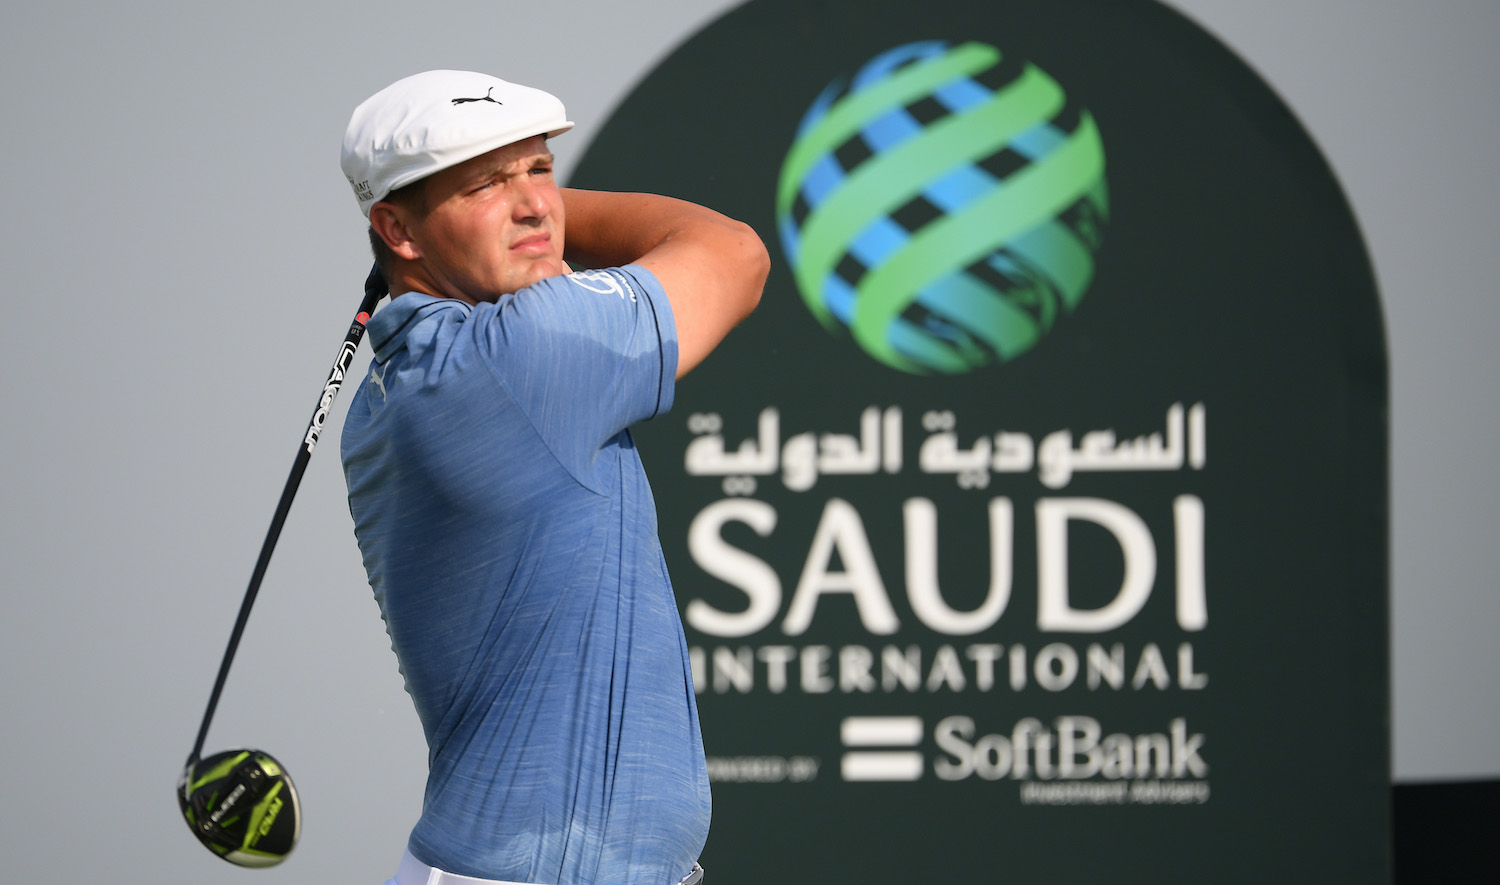 KAEC, SAUDI ARABIA - FEBRUARY 04: Bryson DeChambeau of the USA plays his tee shot on the 17th hole during Day One of the Saudi International powered by SoftBank Investment Advisers at Royal Greens Golf and Country Club on February 04, 2021 in King Abdullah Economic City, Saudi Arabia. (Photo by Ross Kinnaird/Getty Images)